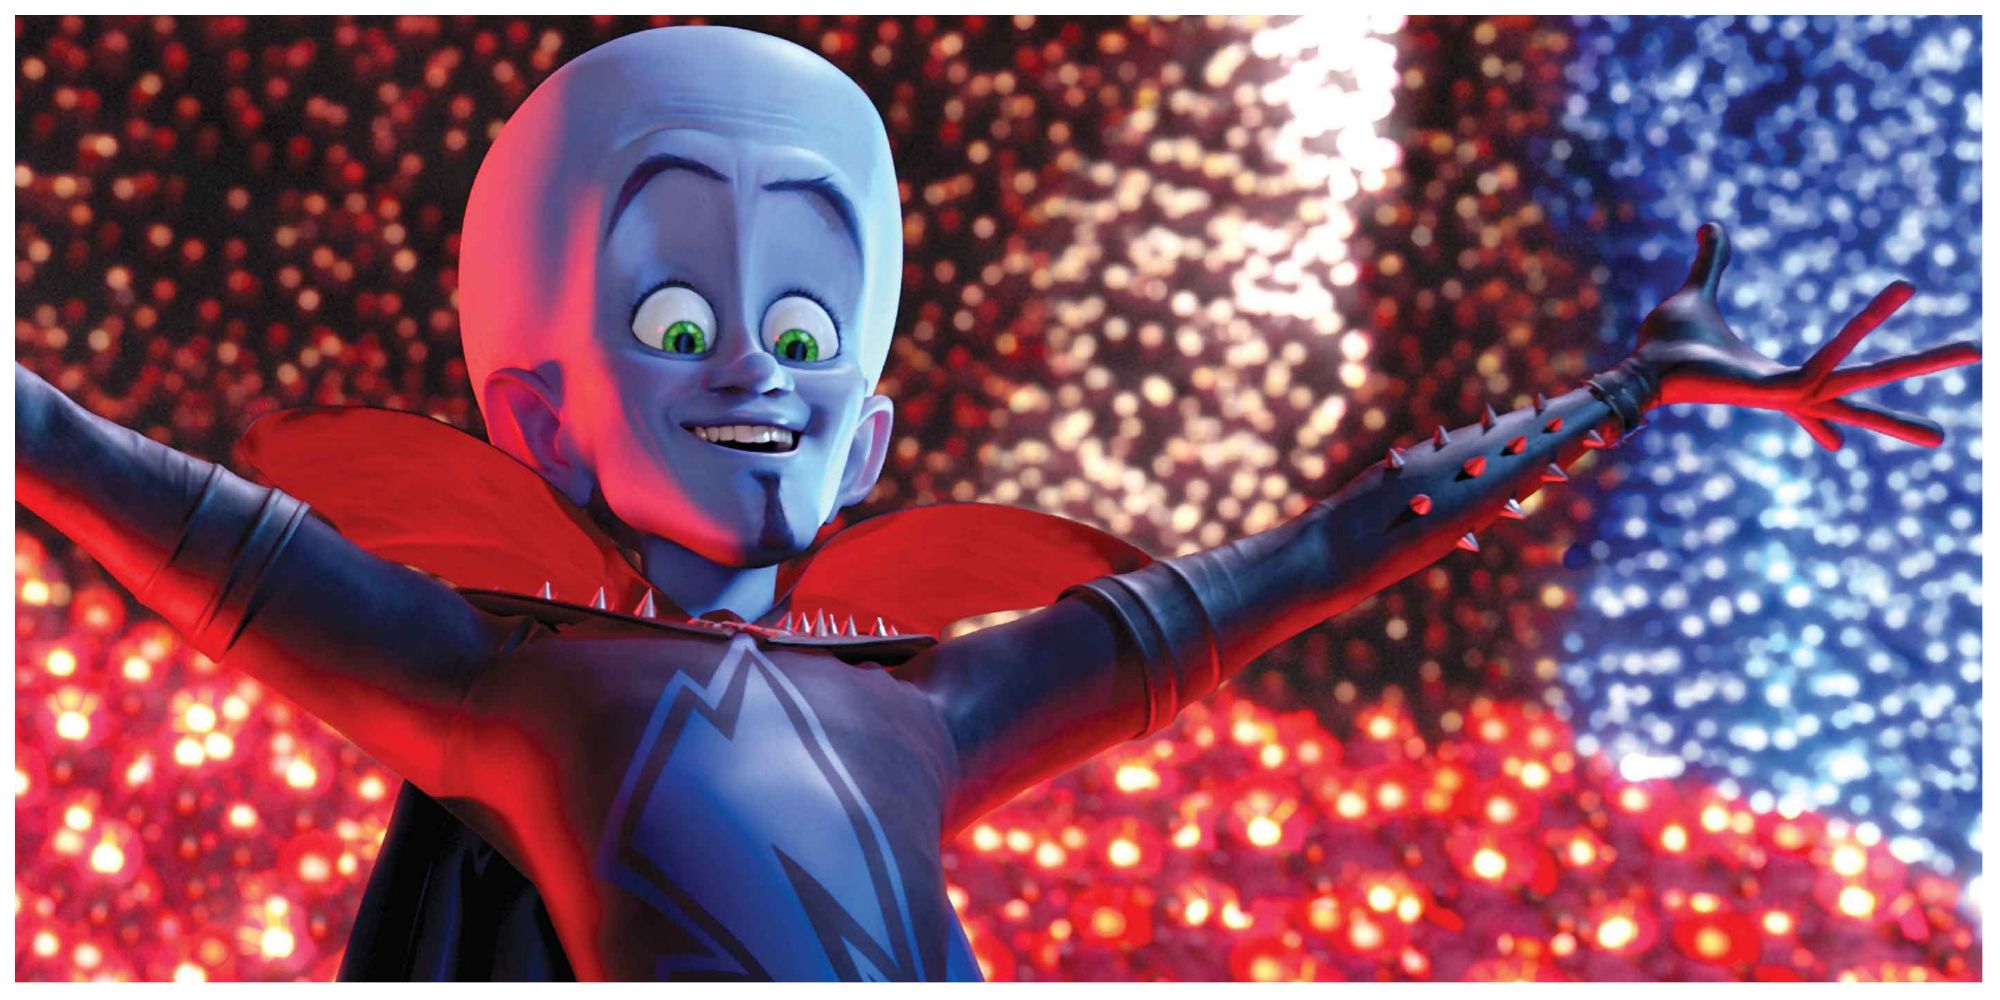 Will Ferrell as Megamind in DreamWorks' Megamind.